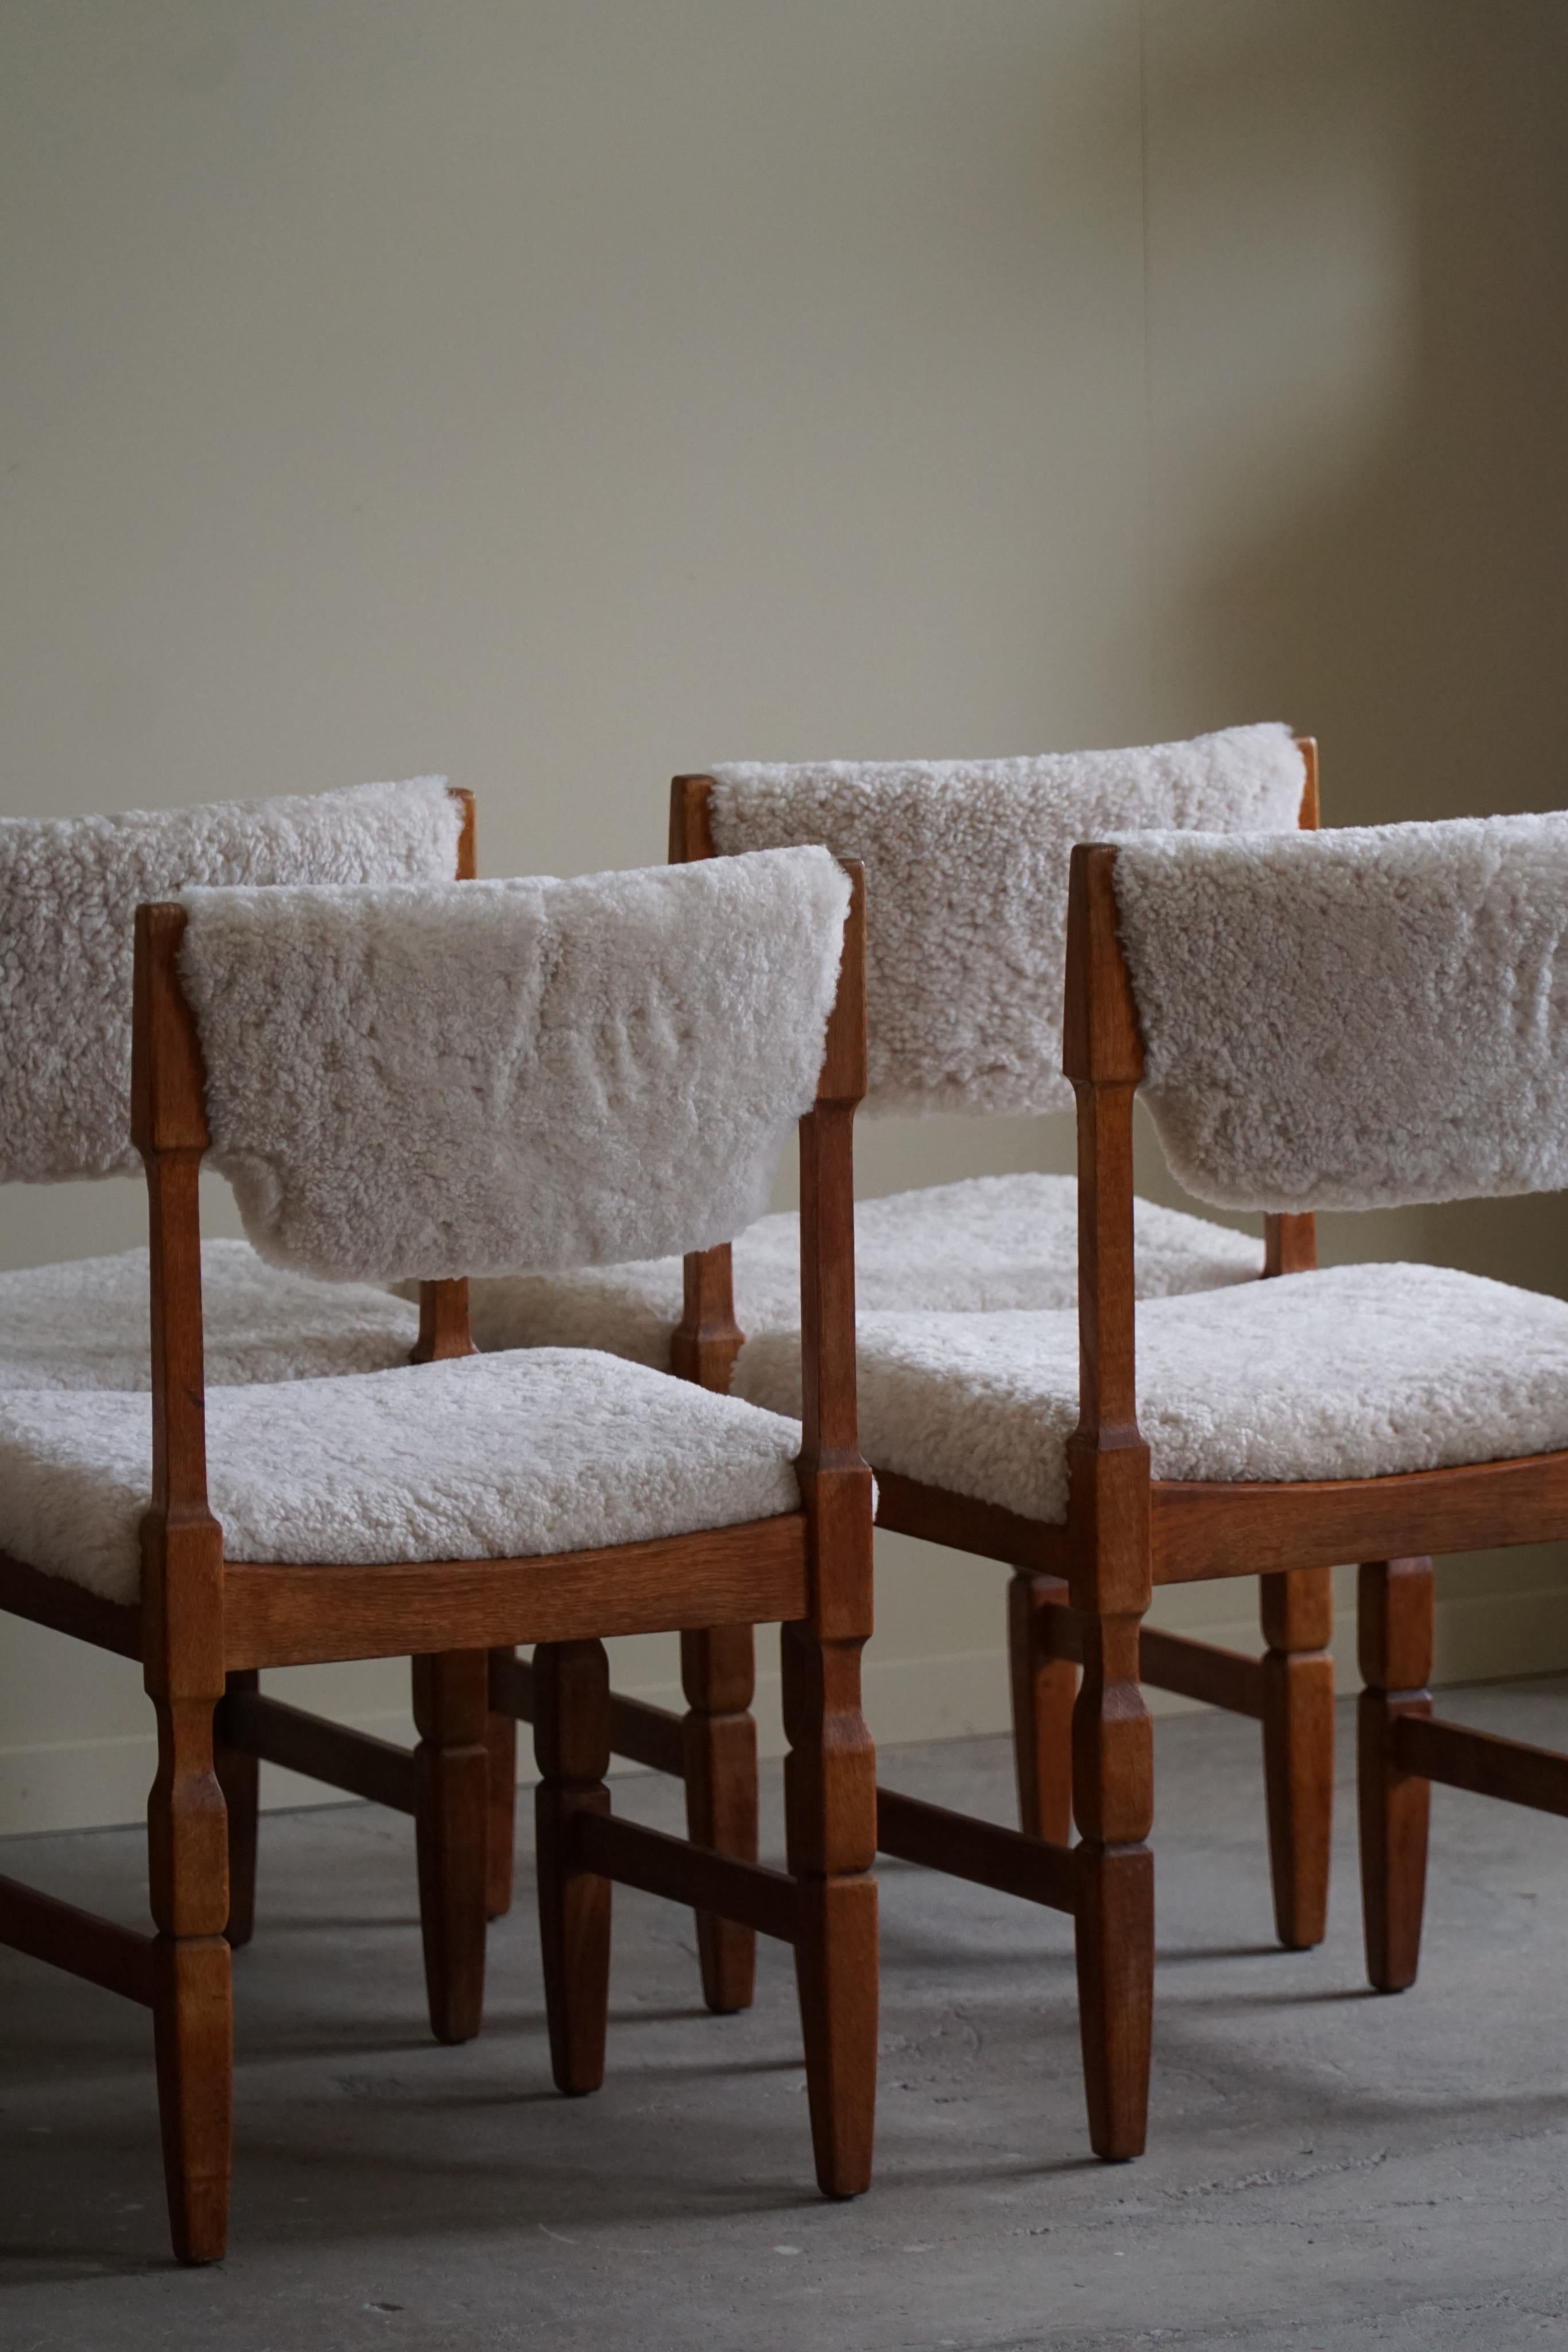 Set of 6 Dining Chairs in Oak & Lambswool, Danish Mid Century Modern, 1960s For Sale 12